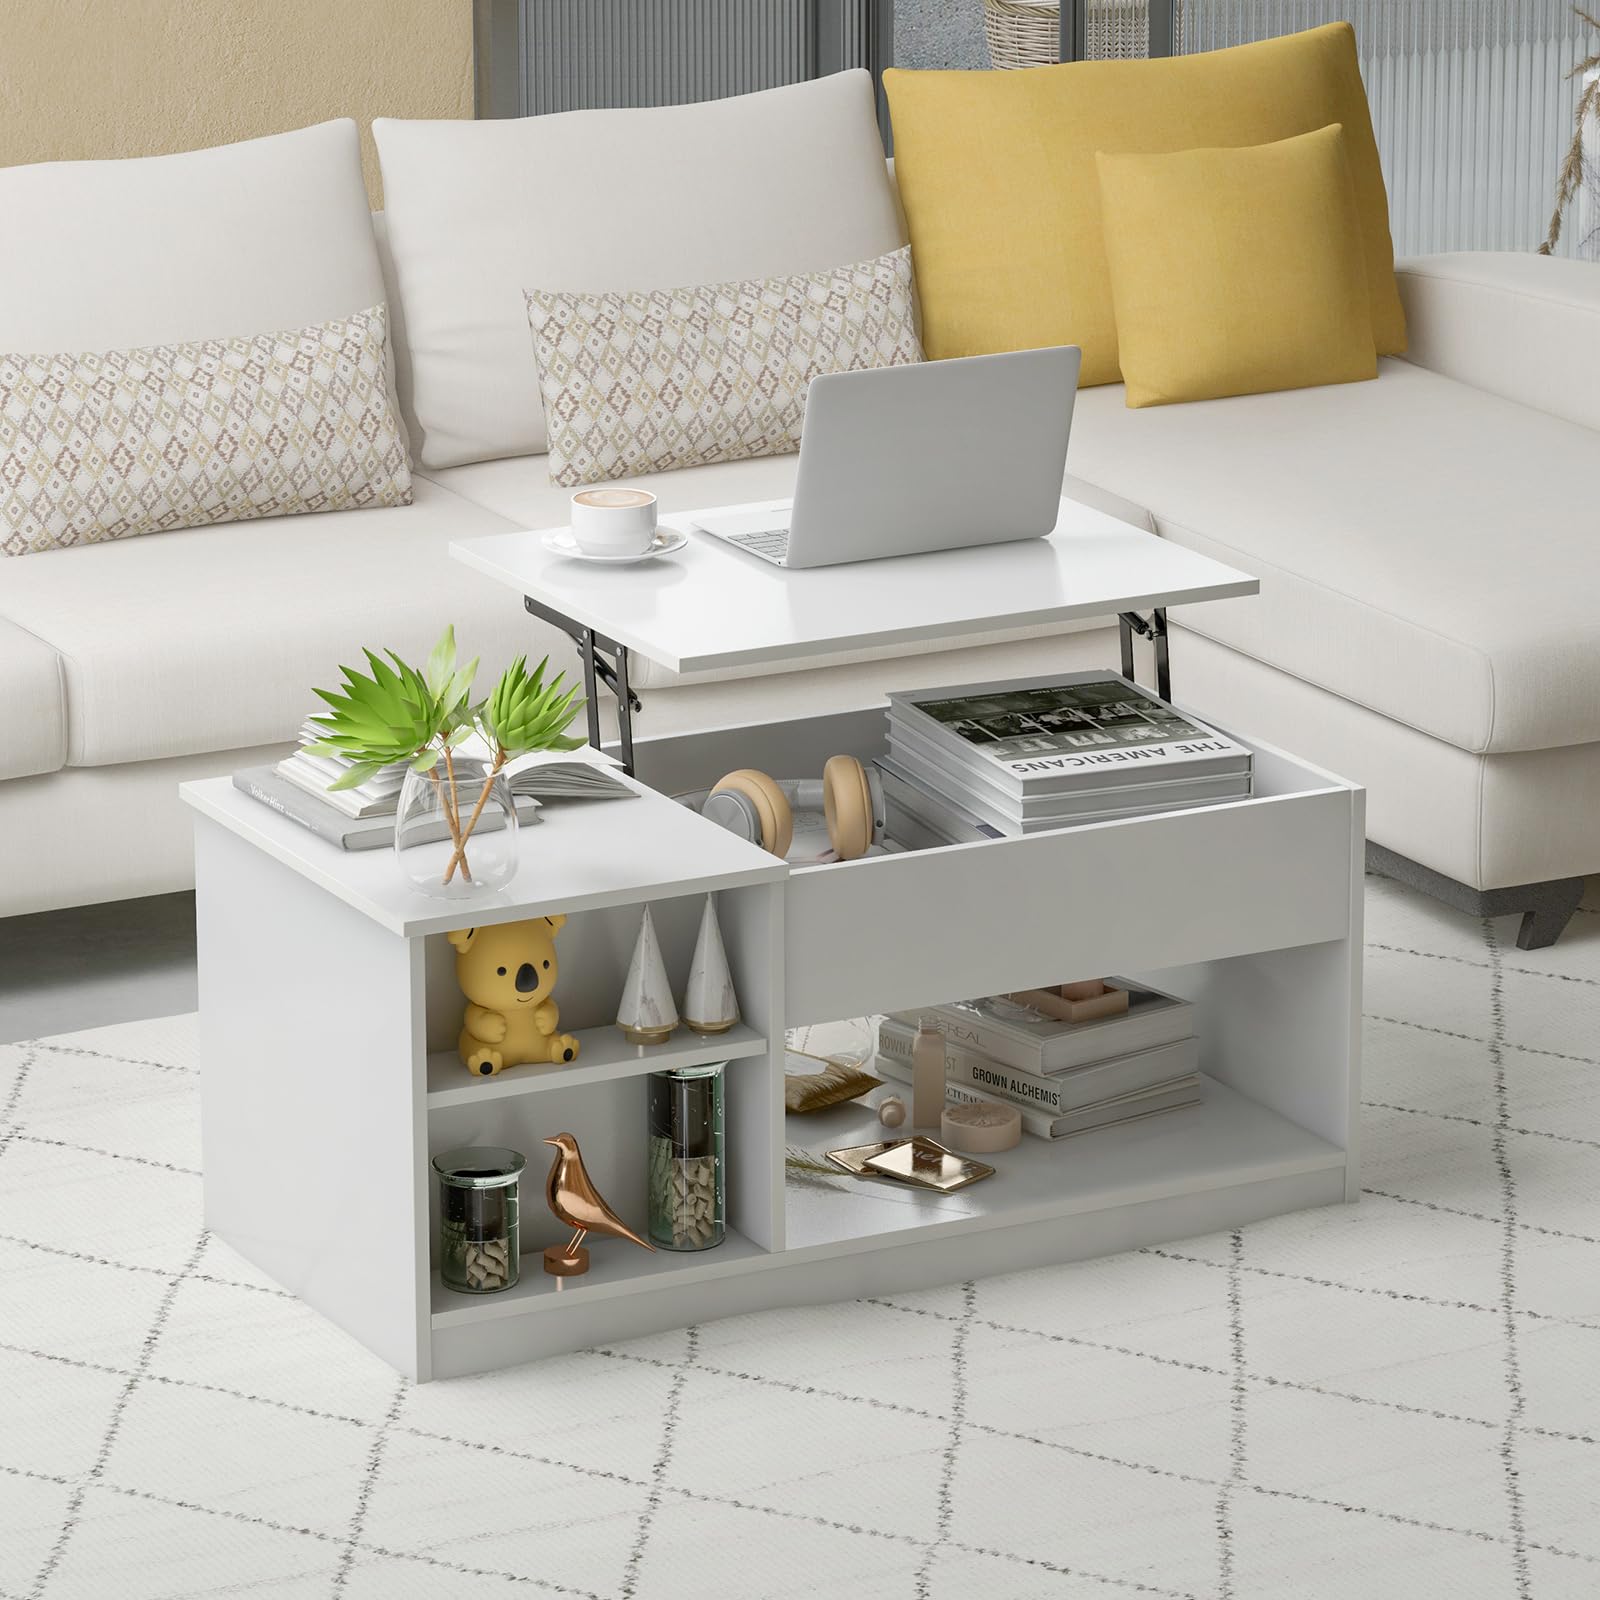 Giantex Lift-Top Coffee Table, Modern Center Table w/Lift Tabletop, Open & Hideaway Compartments